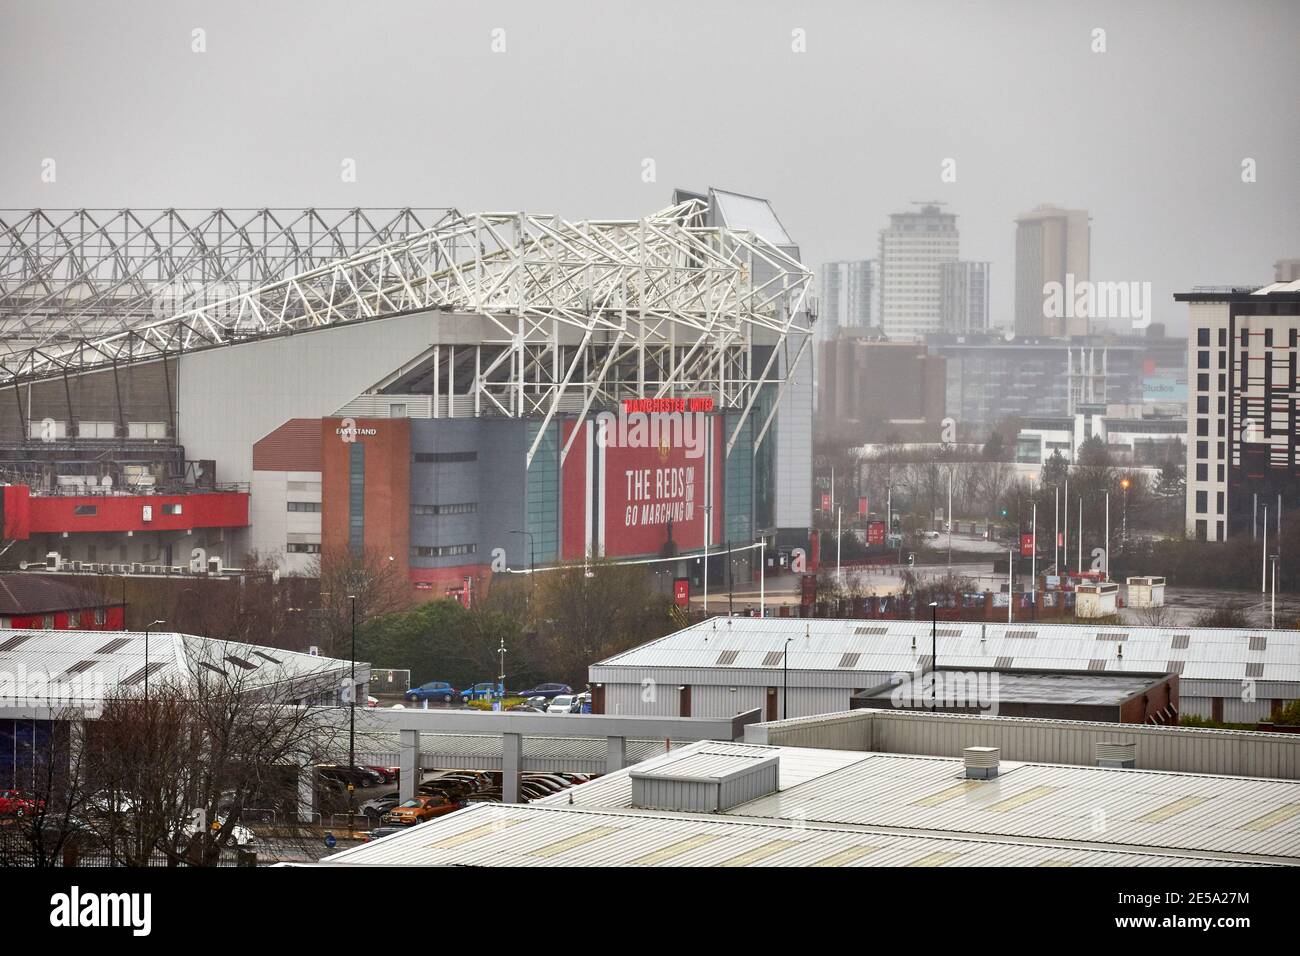 Manchester United Football Club Stadium Old Trafford Theatre of Dreams East Stand exterior Stock Photo